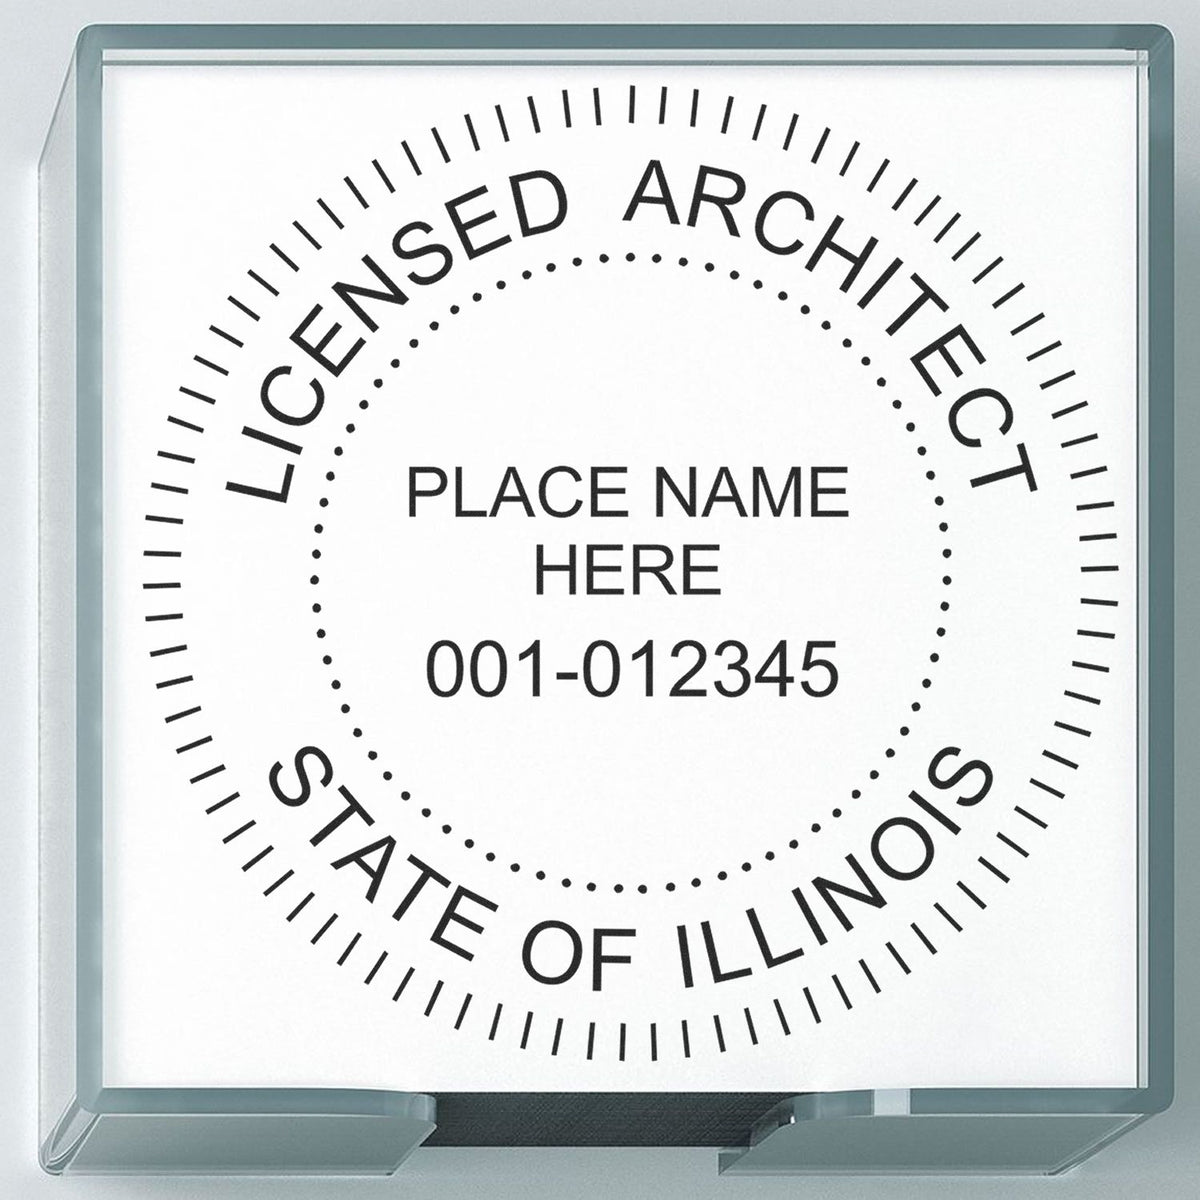 Slim Pre-Inked Illinois Architect Seal Stamp in use photo showing a stamped imprint of the Slim Pre-Inked Illinois Architect Seal Stamp